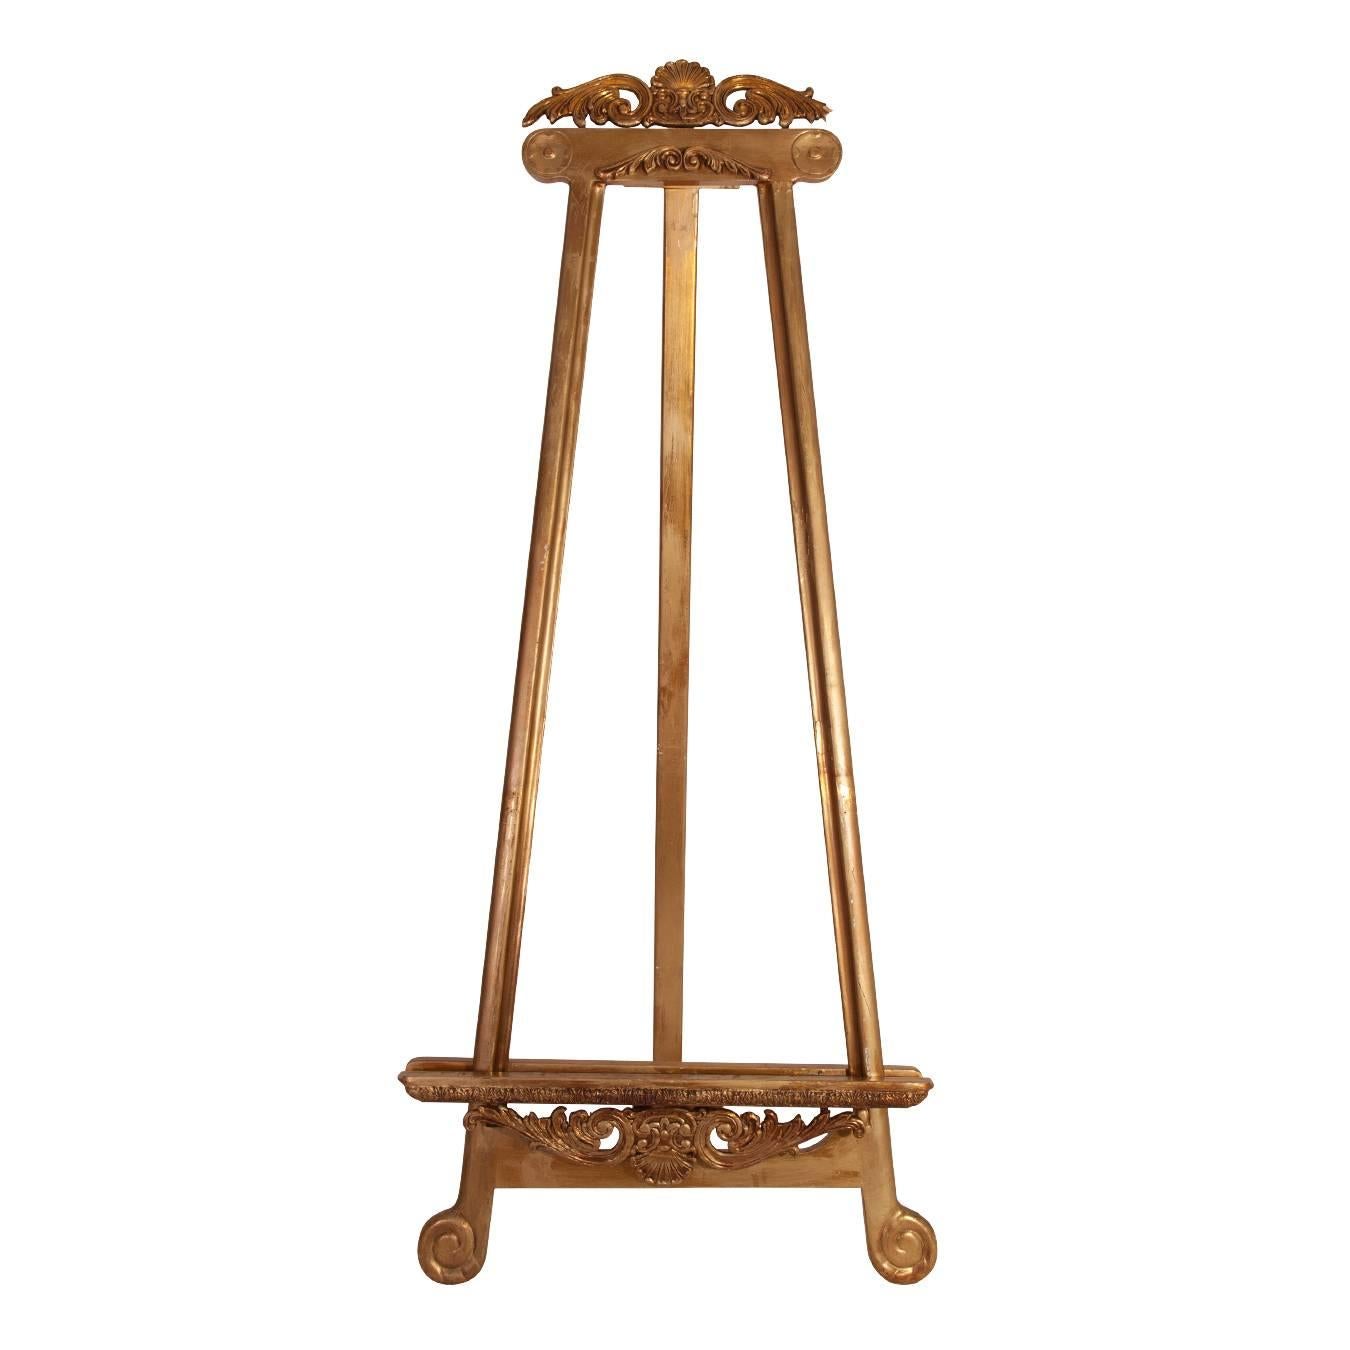 Massive 19th century French gilded easel.